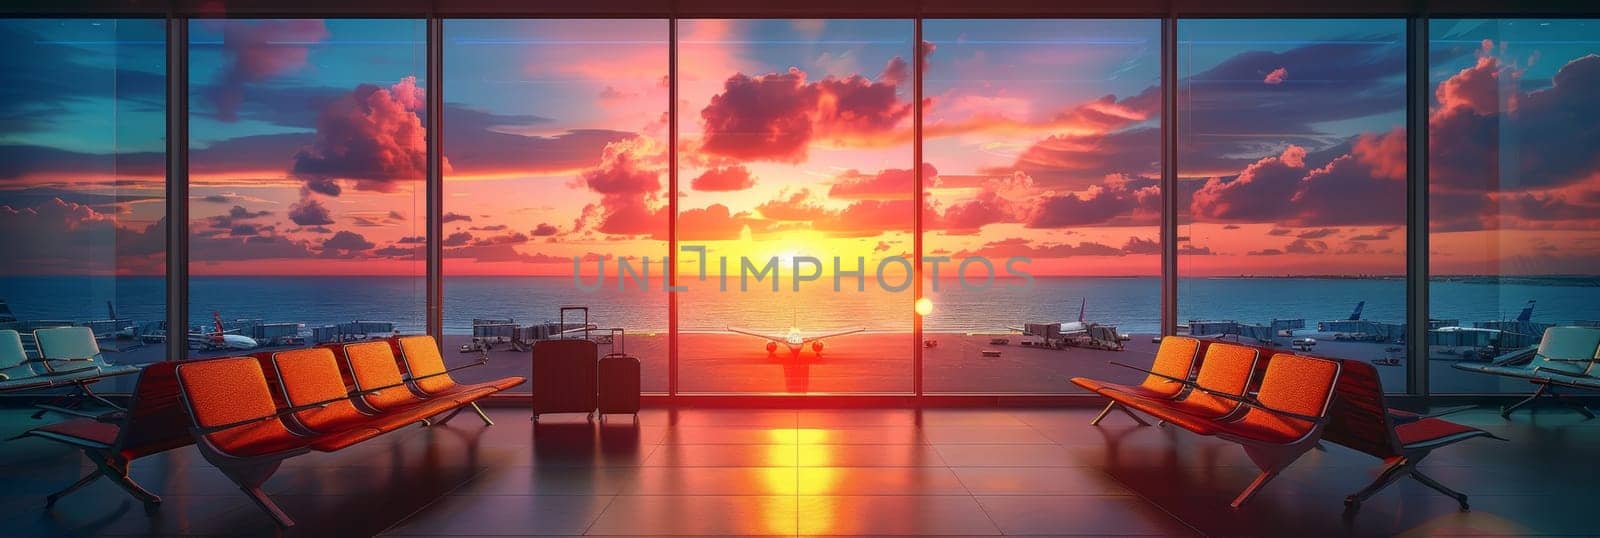 A stunning sunset casts a warm, vibrant glow over the airport lounge, creating a serene and tranquil atmosphere for travelers awaiting their flights. by sfinks